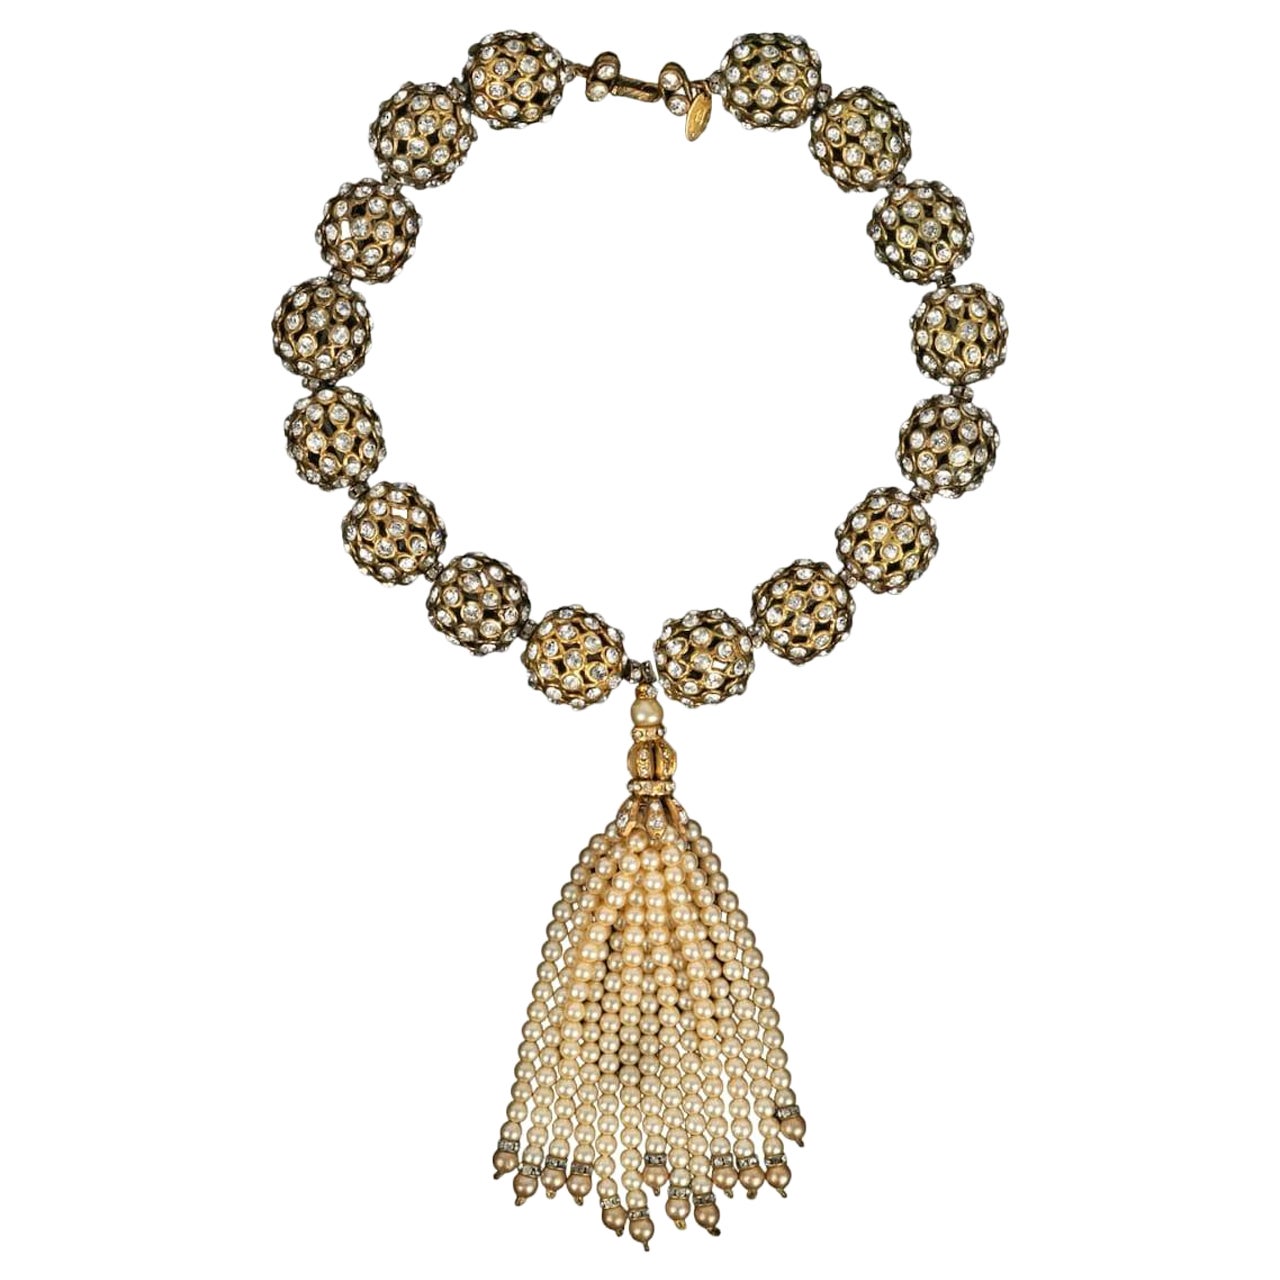 Karl Lagerfeld for Chanel - Chanel Short Necklace Metal Beads Paved Rhinestones French Gold